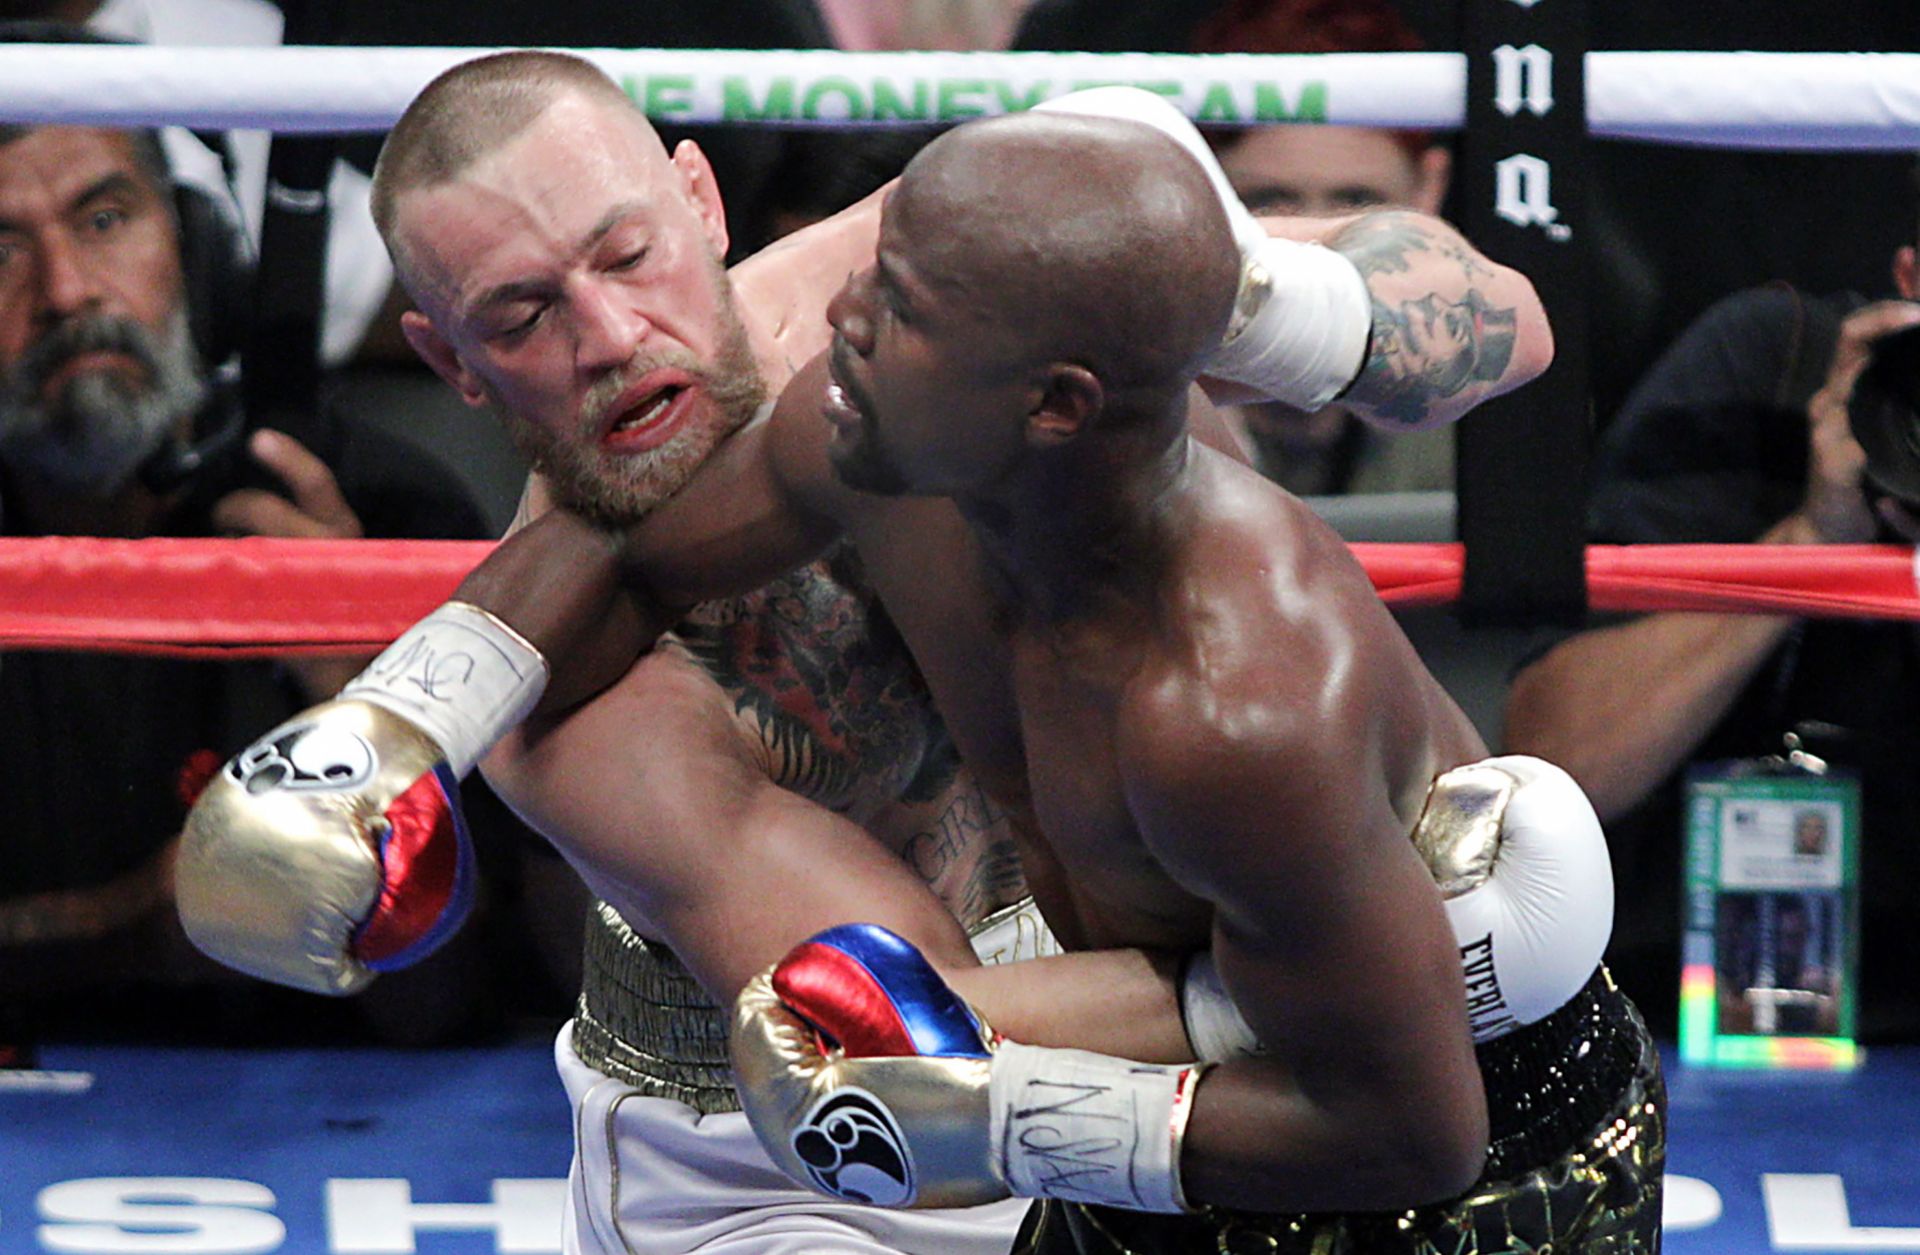 Mixed martial arts star Conor McGregor (L) competes with boxer Floyd Mayweather Jr. in Las Vegas on Aug. 26.